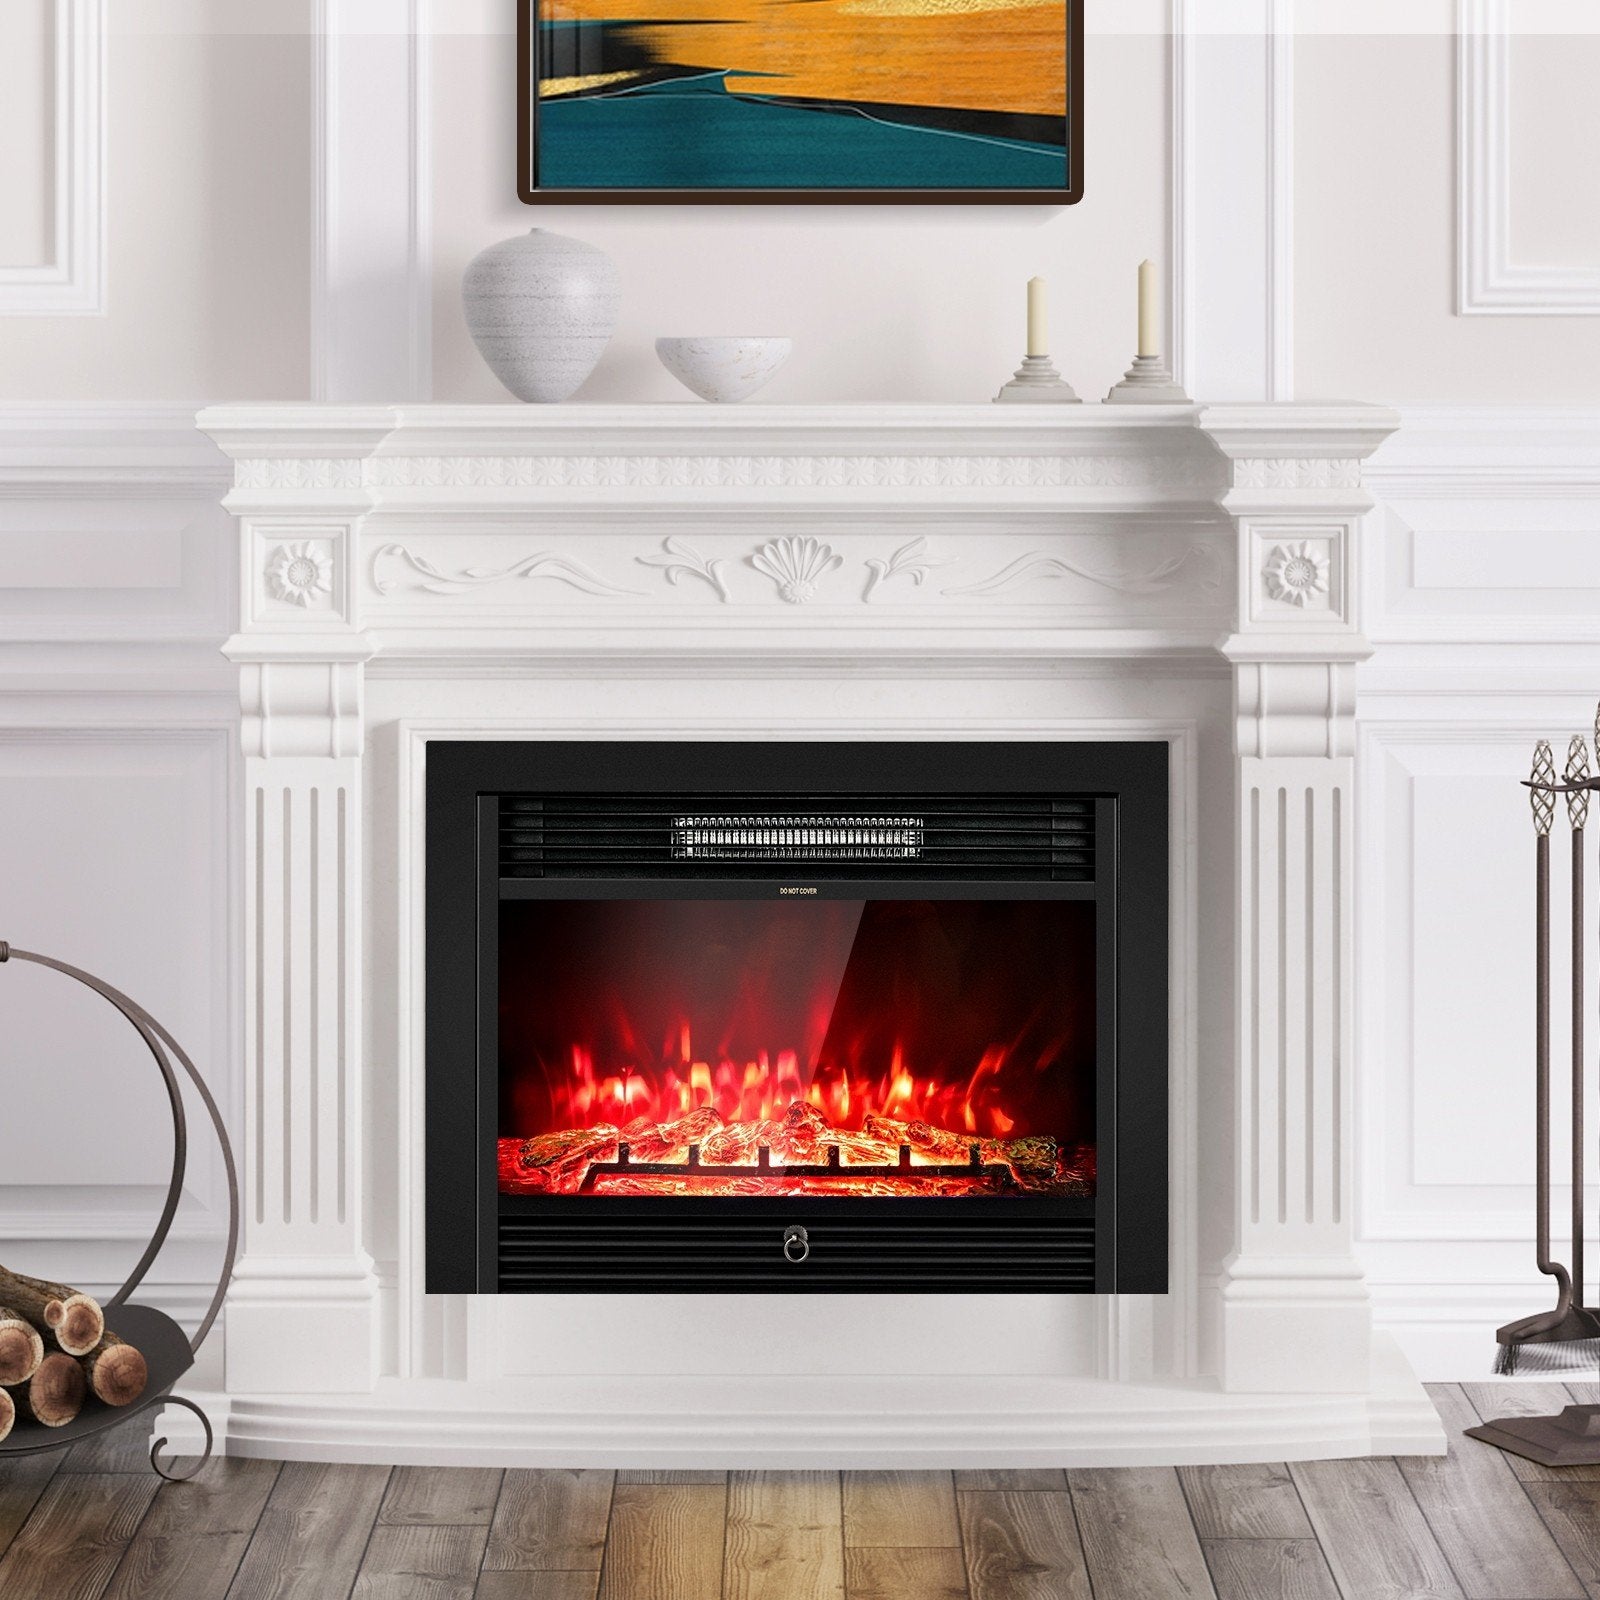 28.5 inch Recessed Mounted Standing Fireplace Heater with 3 Flame Option